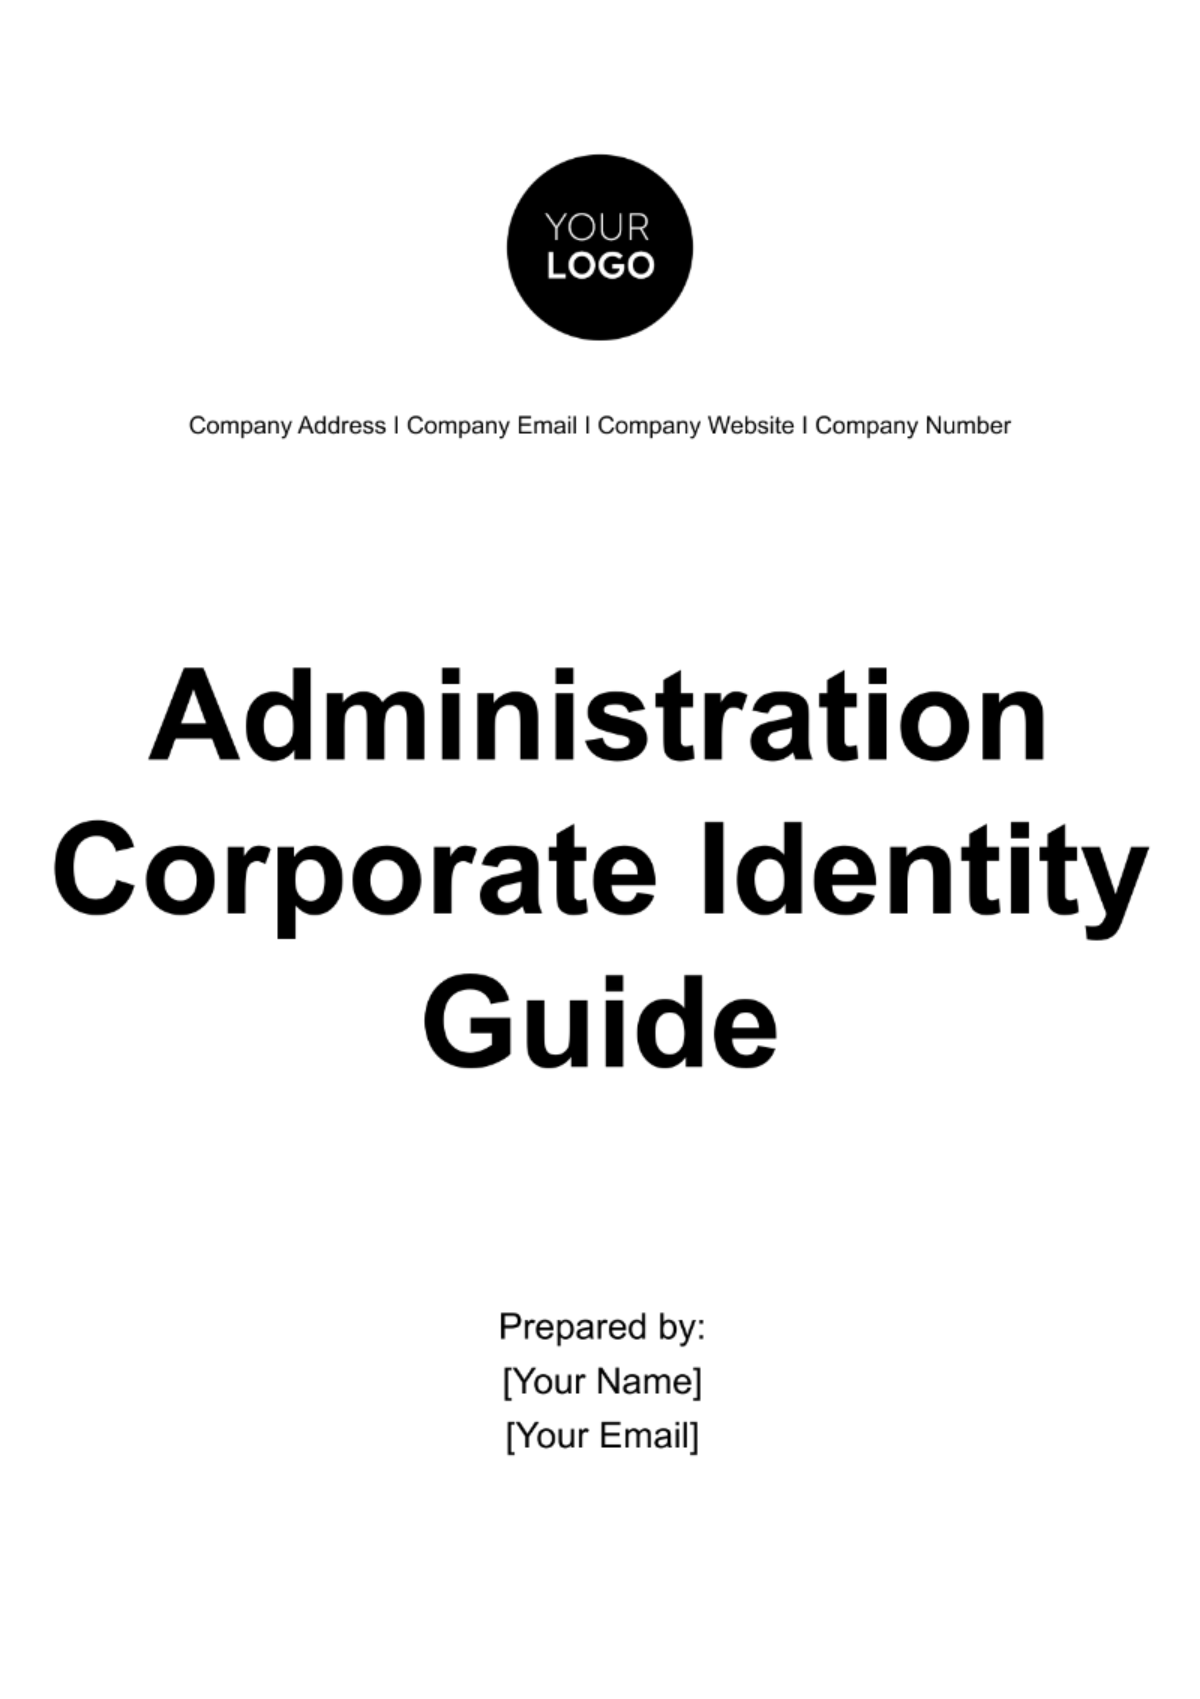 Administration Corporate Identity Guide Template